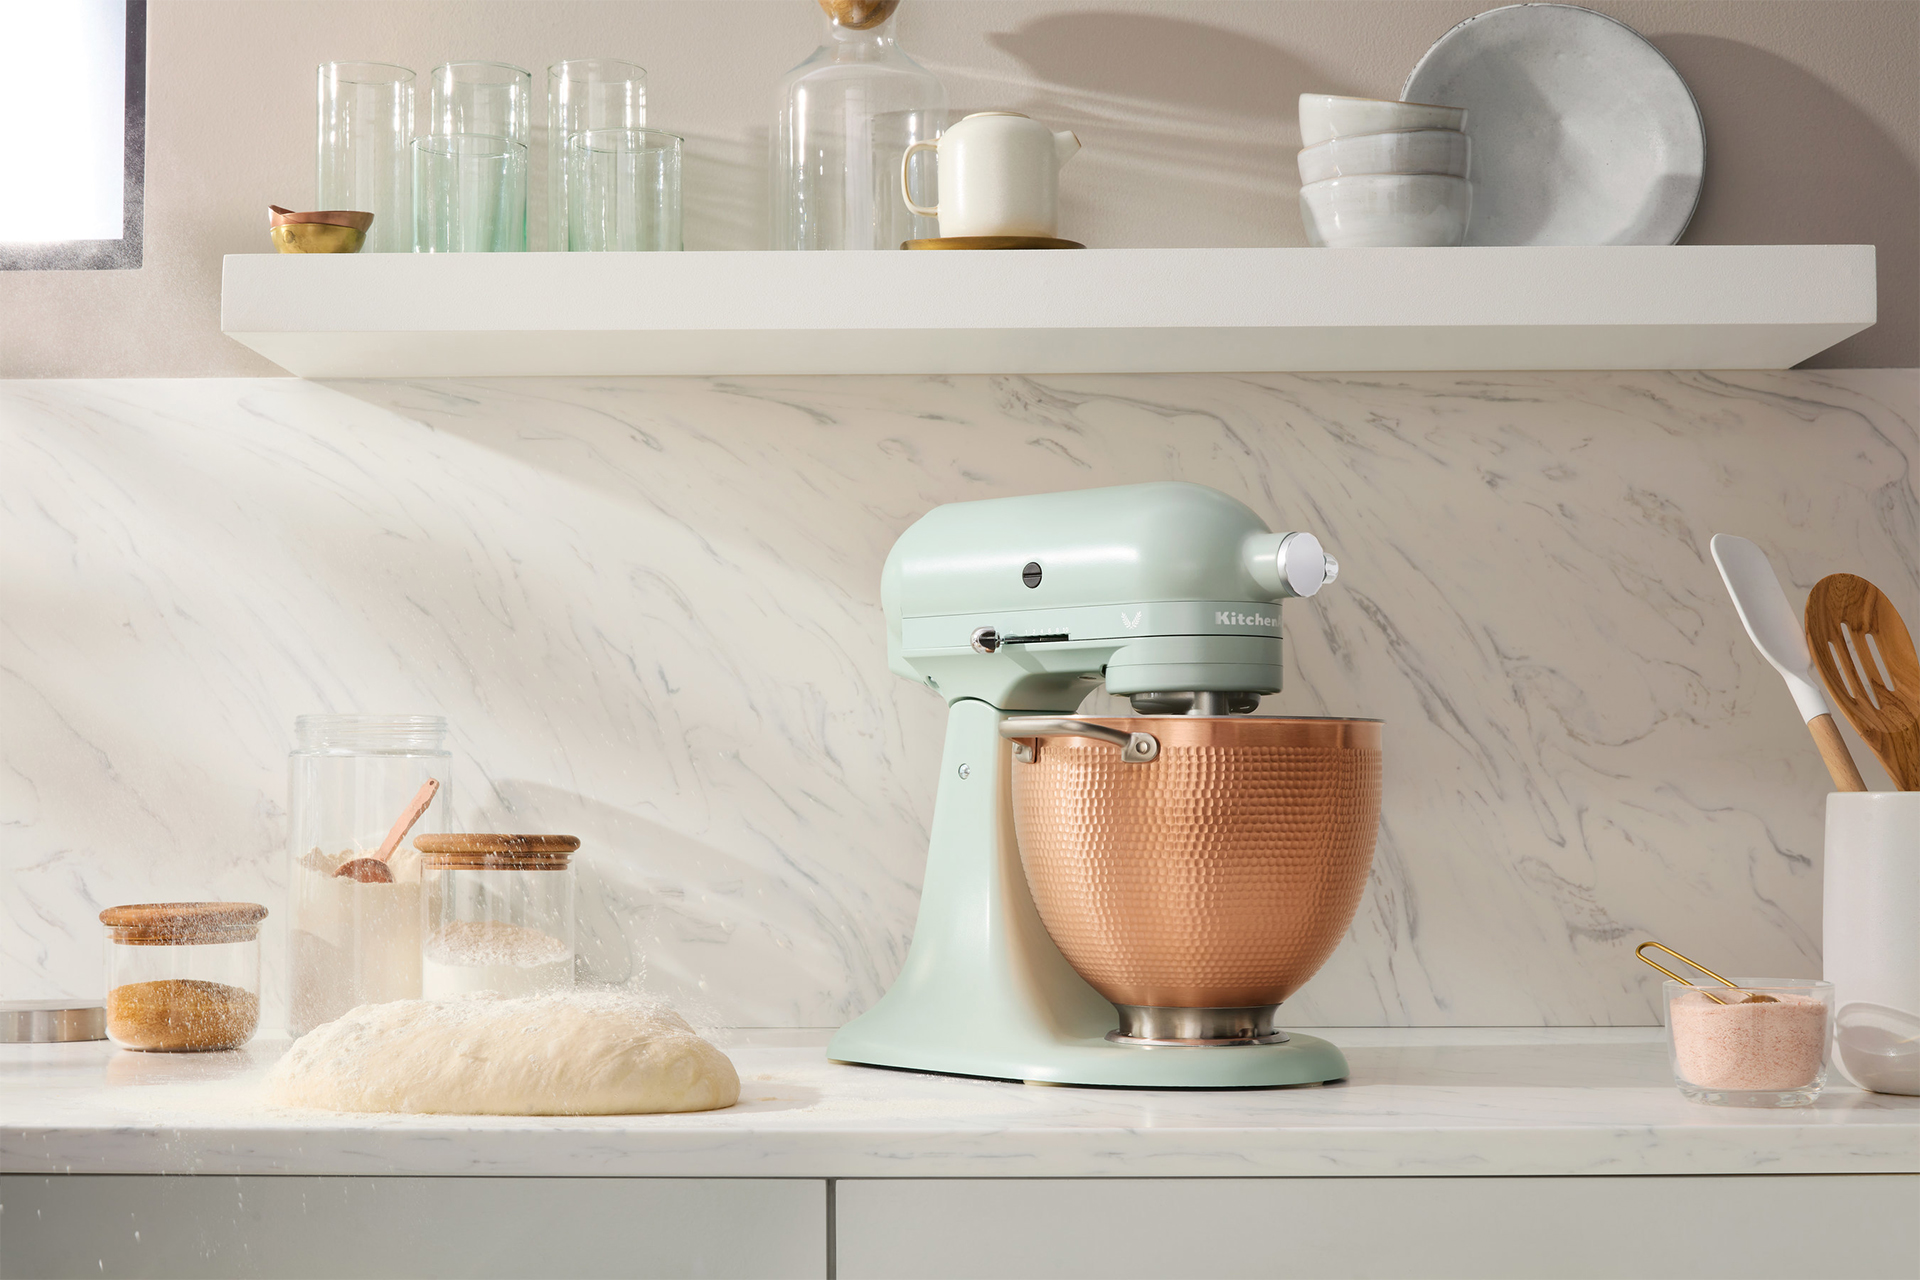 KitchenAid unveils botanical touches, green hue in newest stand